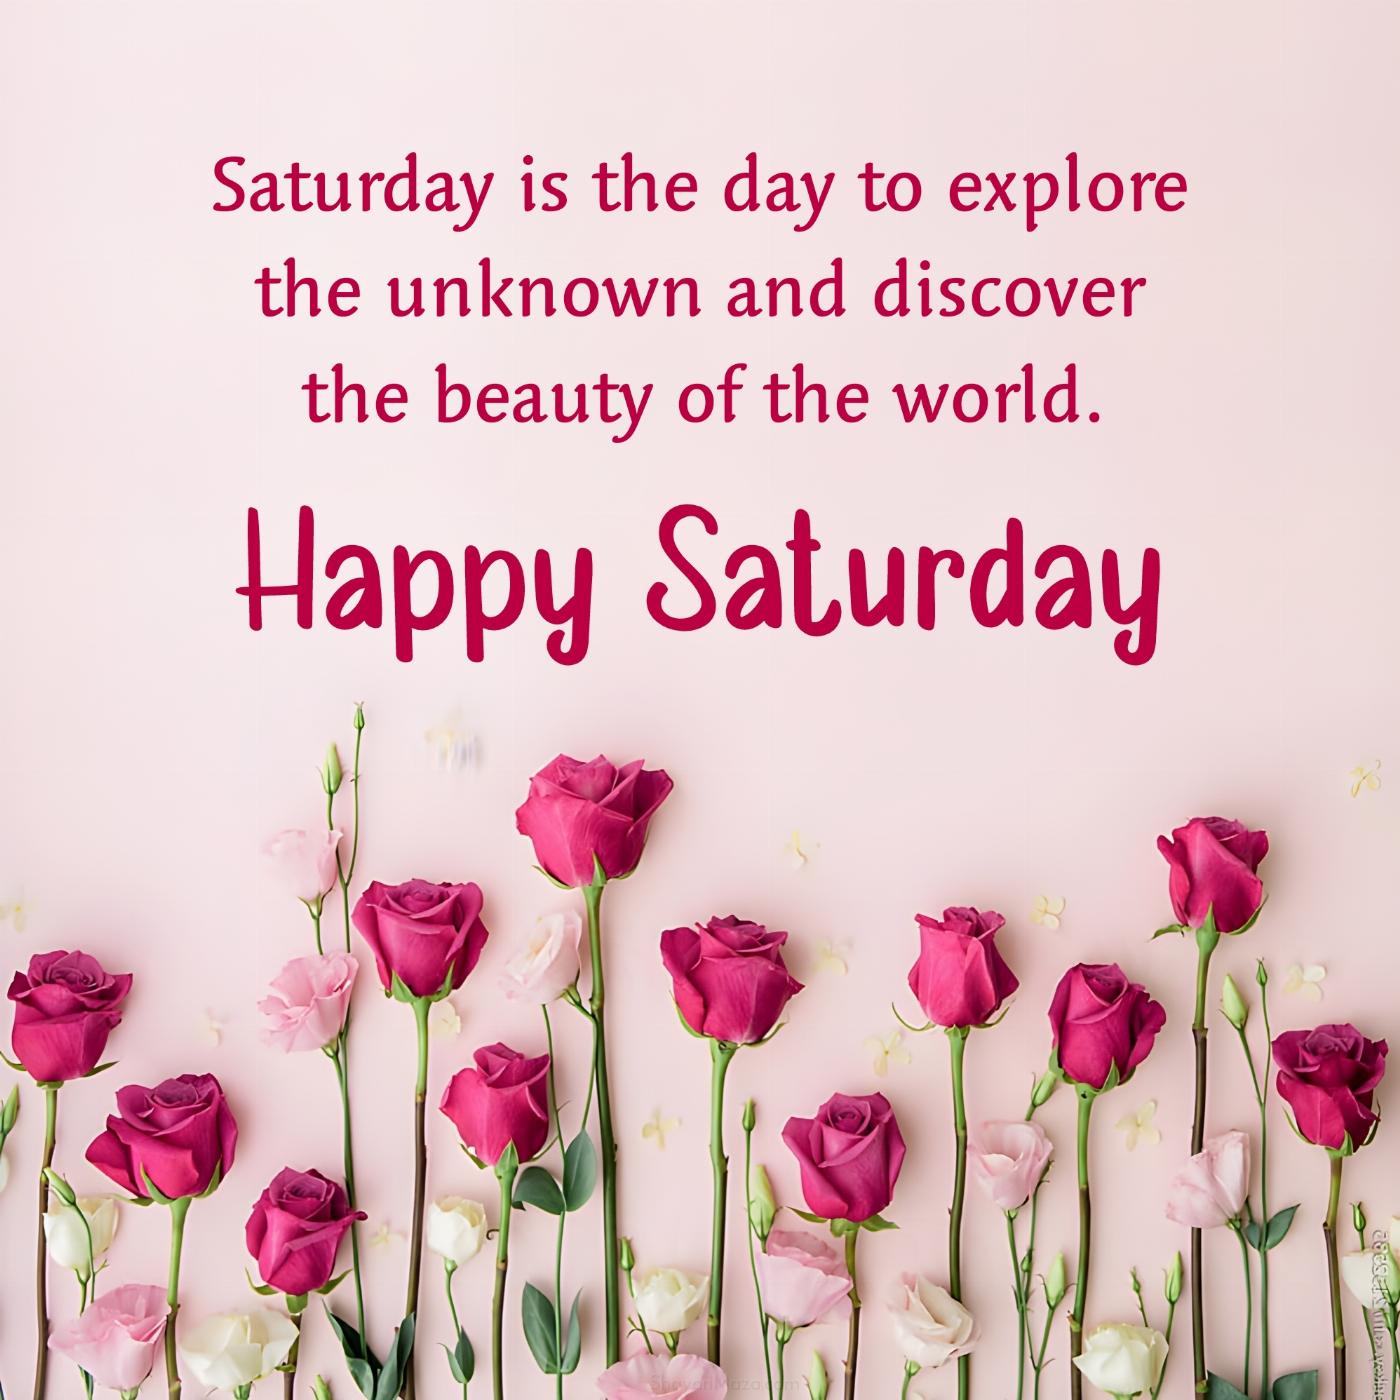 Saturday is the day to explore the unknown and discover the beauty